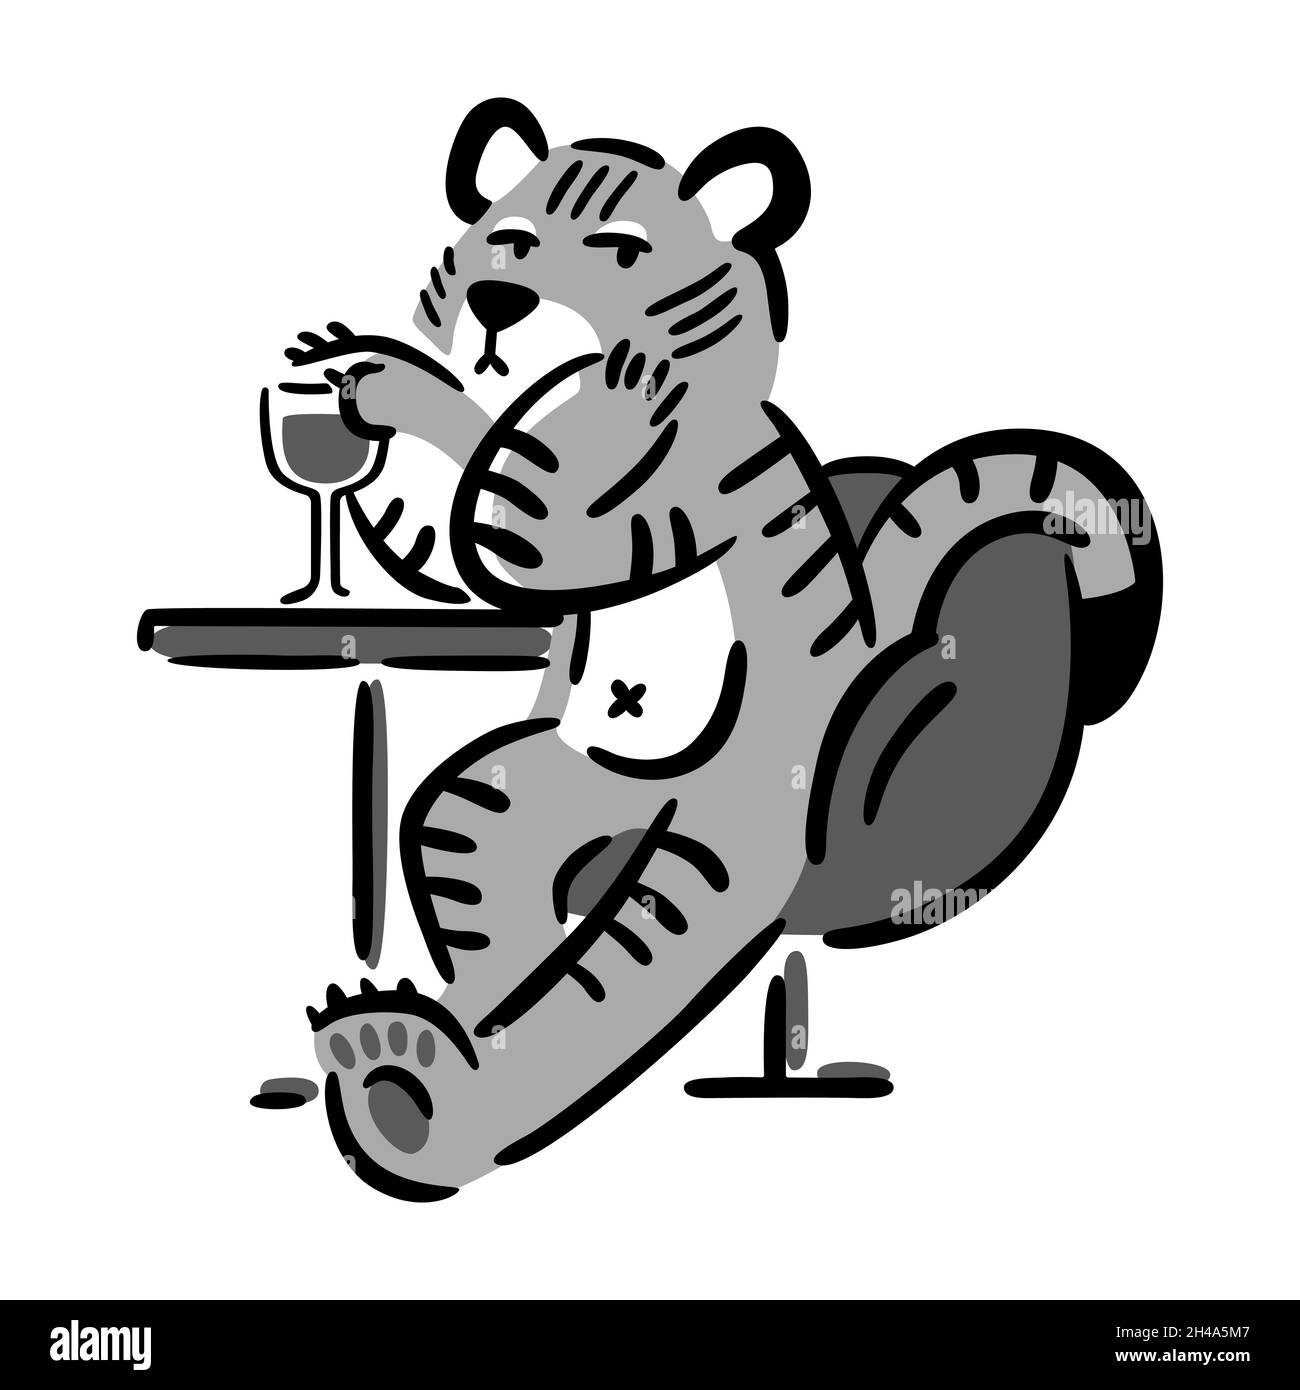 Tiger sitting in chair with glass of wine. Chinese zodiac animal. Symbol of the new year 2022, 2034. Vector illustration isolated on white background. Stock Vector